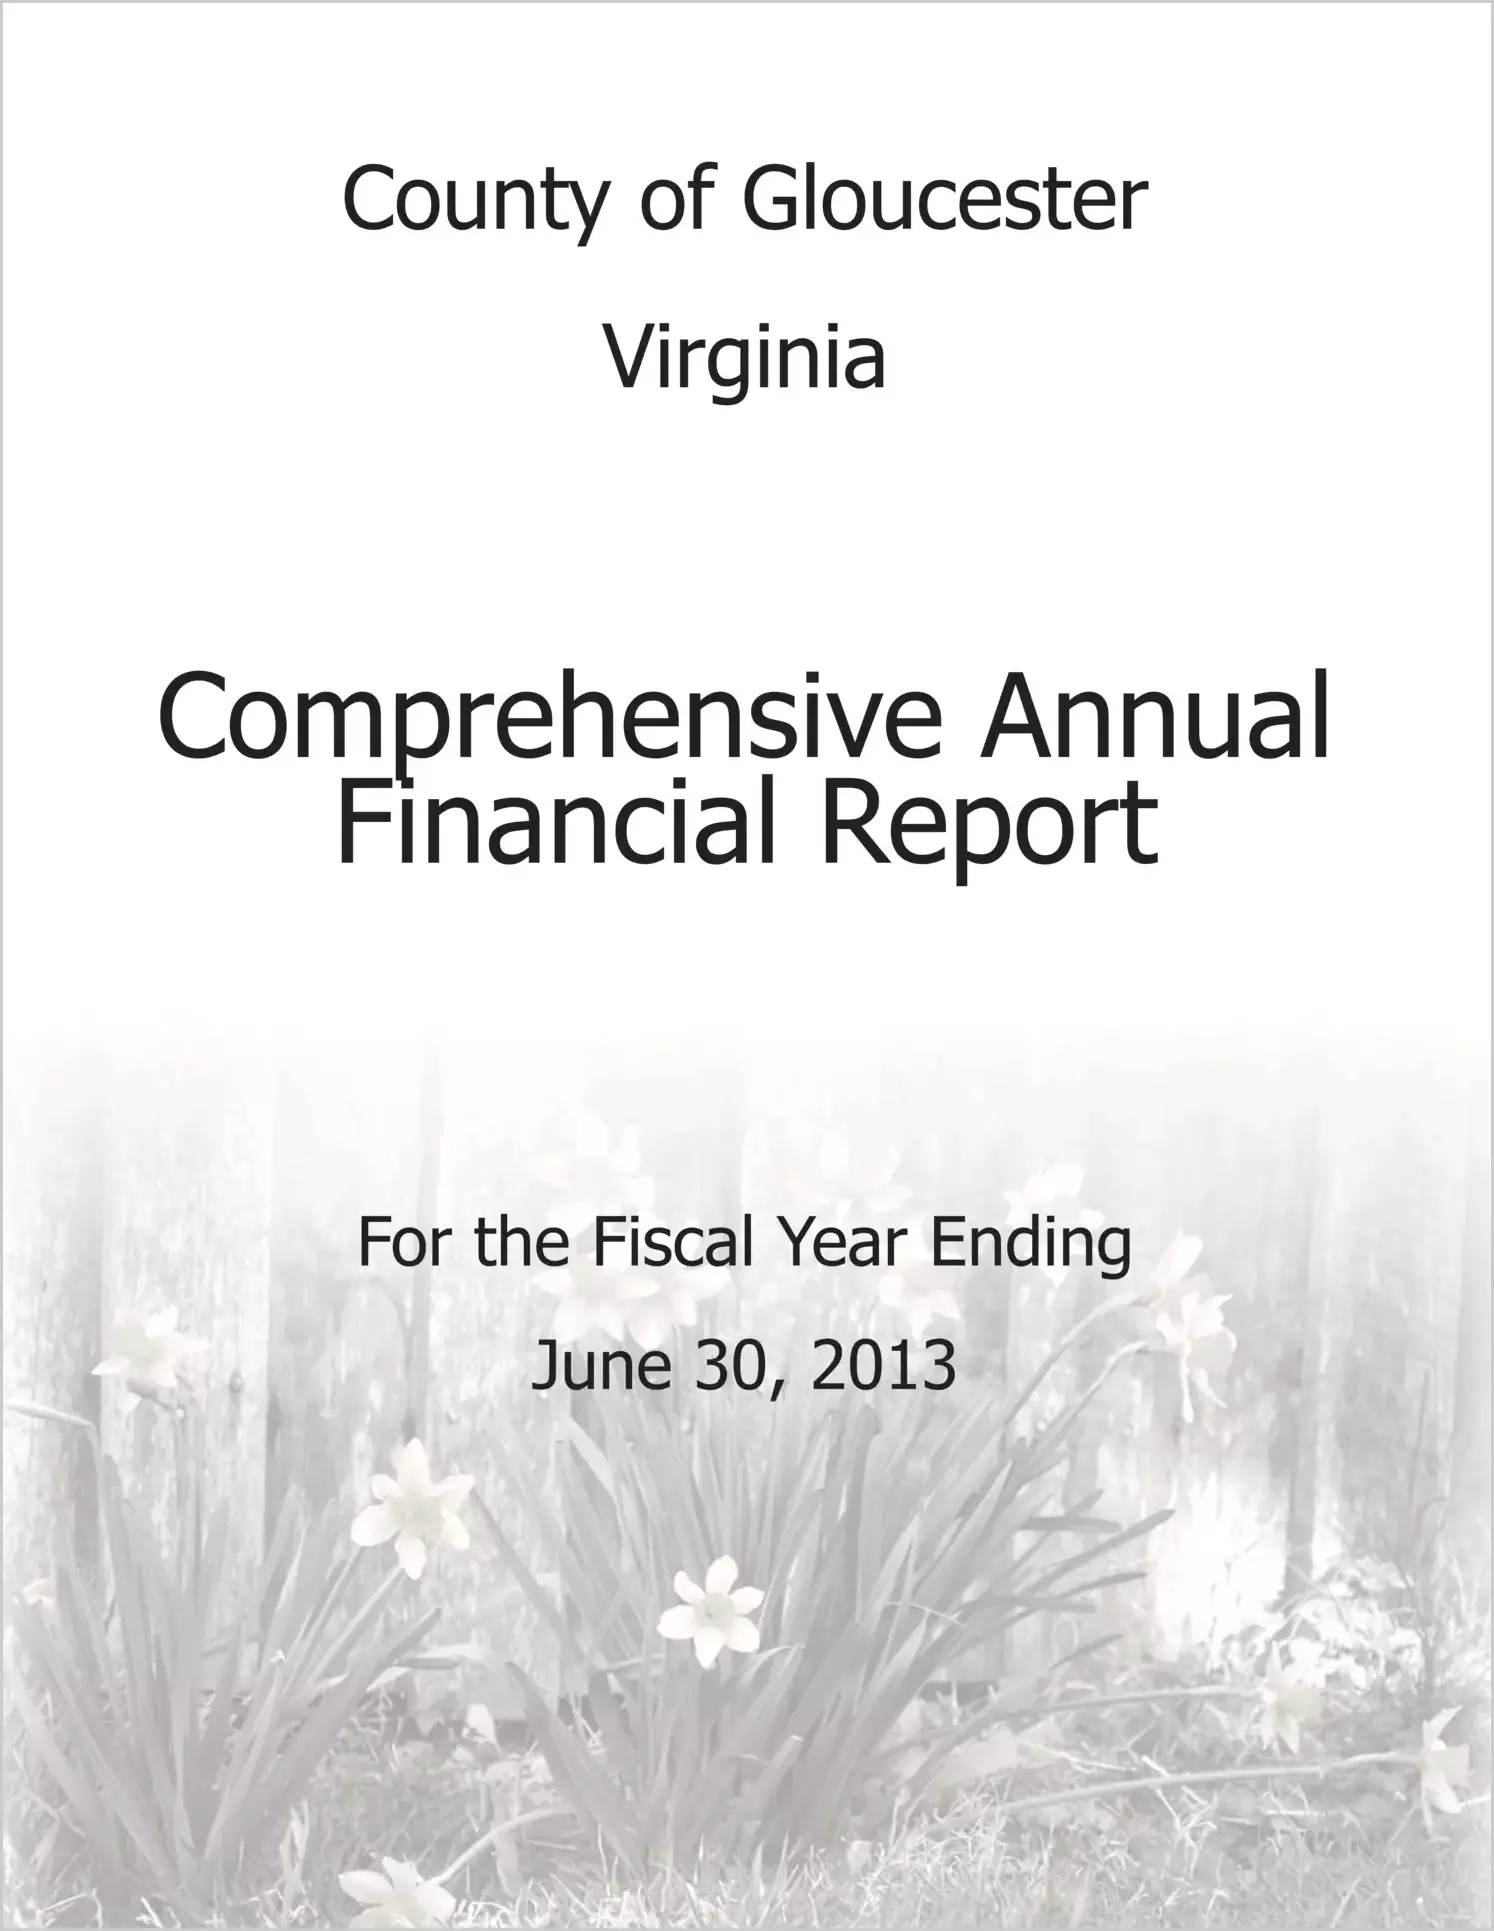 2013 Annual Financial Report for County of Gloucester